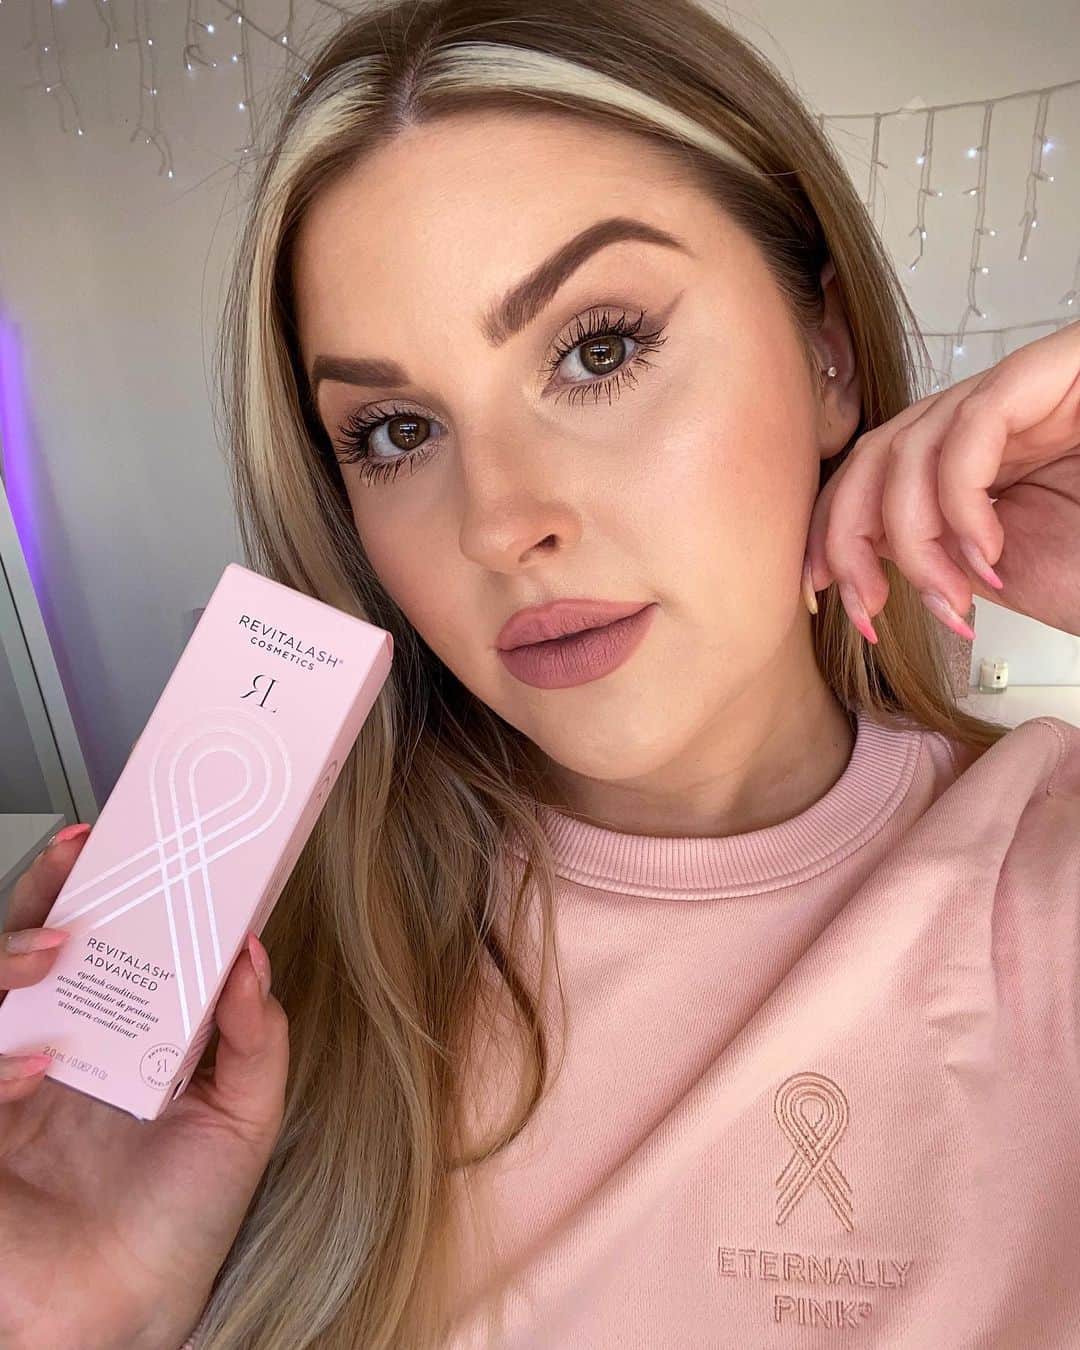 Shannonさんのインスタグラム写真 - (ShannonInstagram)「Here’s another reason Revitalash is my favorite lash serum... not only does it WORK, but also this 👇🏼 ⠀⠀⠀⠀⠀⠀⠀⠀⠀ ⠀⠀⠀⠀⠀⠀⠀⠀⠀ ⠀⠀⠀⠀⠀⠀⠀⠀⠀ ⠀⠀⠀⠀⠀⠀⠀⠀⠀  As proud supporters of year-round breast cancer initiatives, @revitalashnewzealand turns pink for the month of October to give back globally to the community from which it was founded. ⠀⠀⠀⠀⠀⠀⠀⠀⠀ The team at @revitalashnewzealand have TWO amazing fundraising initiatives running this month! 🥰 ⠀⠀⠀⠀⠀⠀⠀⠀⠀ Firstly, for every pink product that is sold nationwide, they will donate a one month supply of RevitaLash or RevitaBrow to @lgfbnz which is a charity I absolutely LOVE! 💕 (this includes sales via @xobeautyshop, we stock their amazing range! So now is the perfect time to try it or stock up) ⠀⠀⠀⠀⠀⠀⠀⠀⠀ And secondly, they have released their first ever fundraising garment - the Eternally Pink jumper. 100% of the profits from their pink jumper sales will be donated to @pincandsteel - that's ONE HUNDRED PERCENT of the profits 🥳 http://revitalash.co.nz 💓 they are such an amazing company 😭 I just had to share this initiative with u guys (AD PR GIFT)」10月7日 4時26分 - shaaanxo